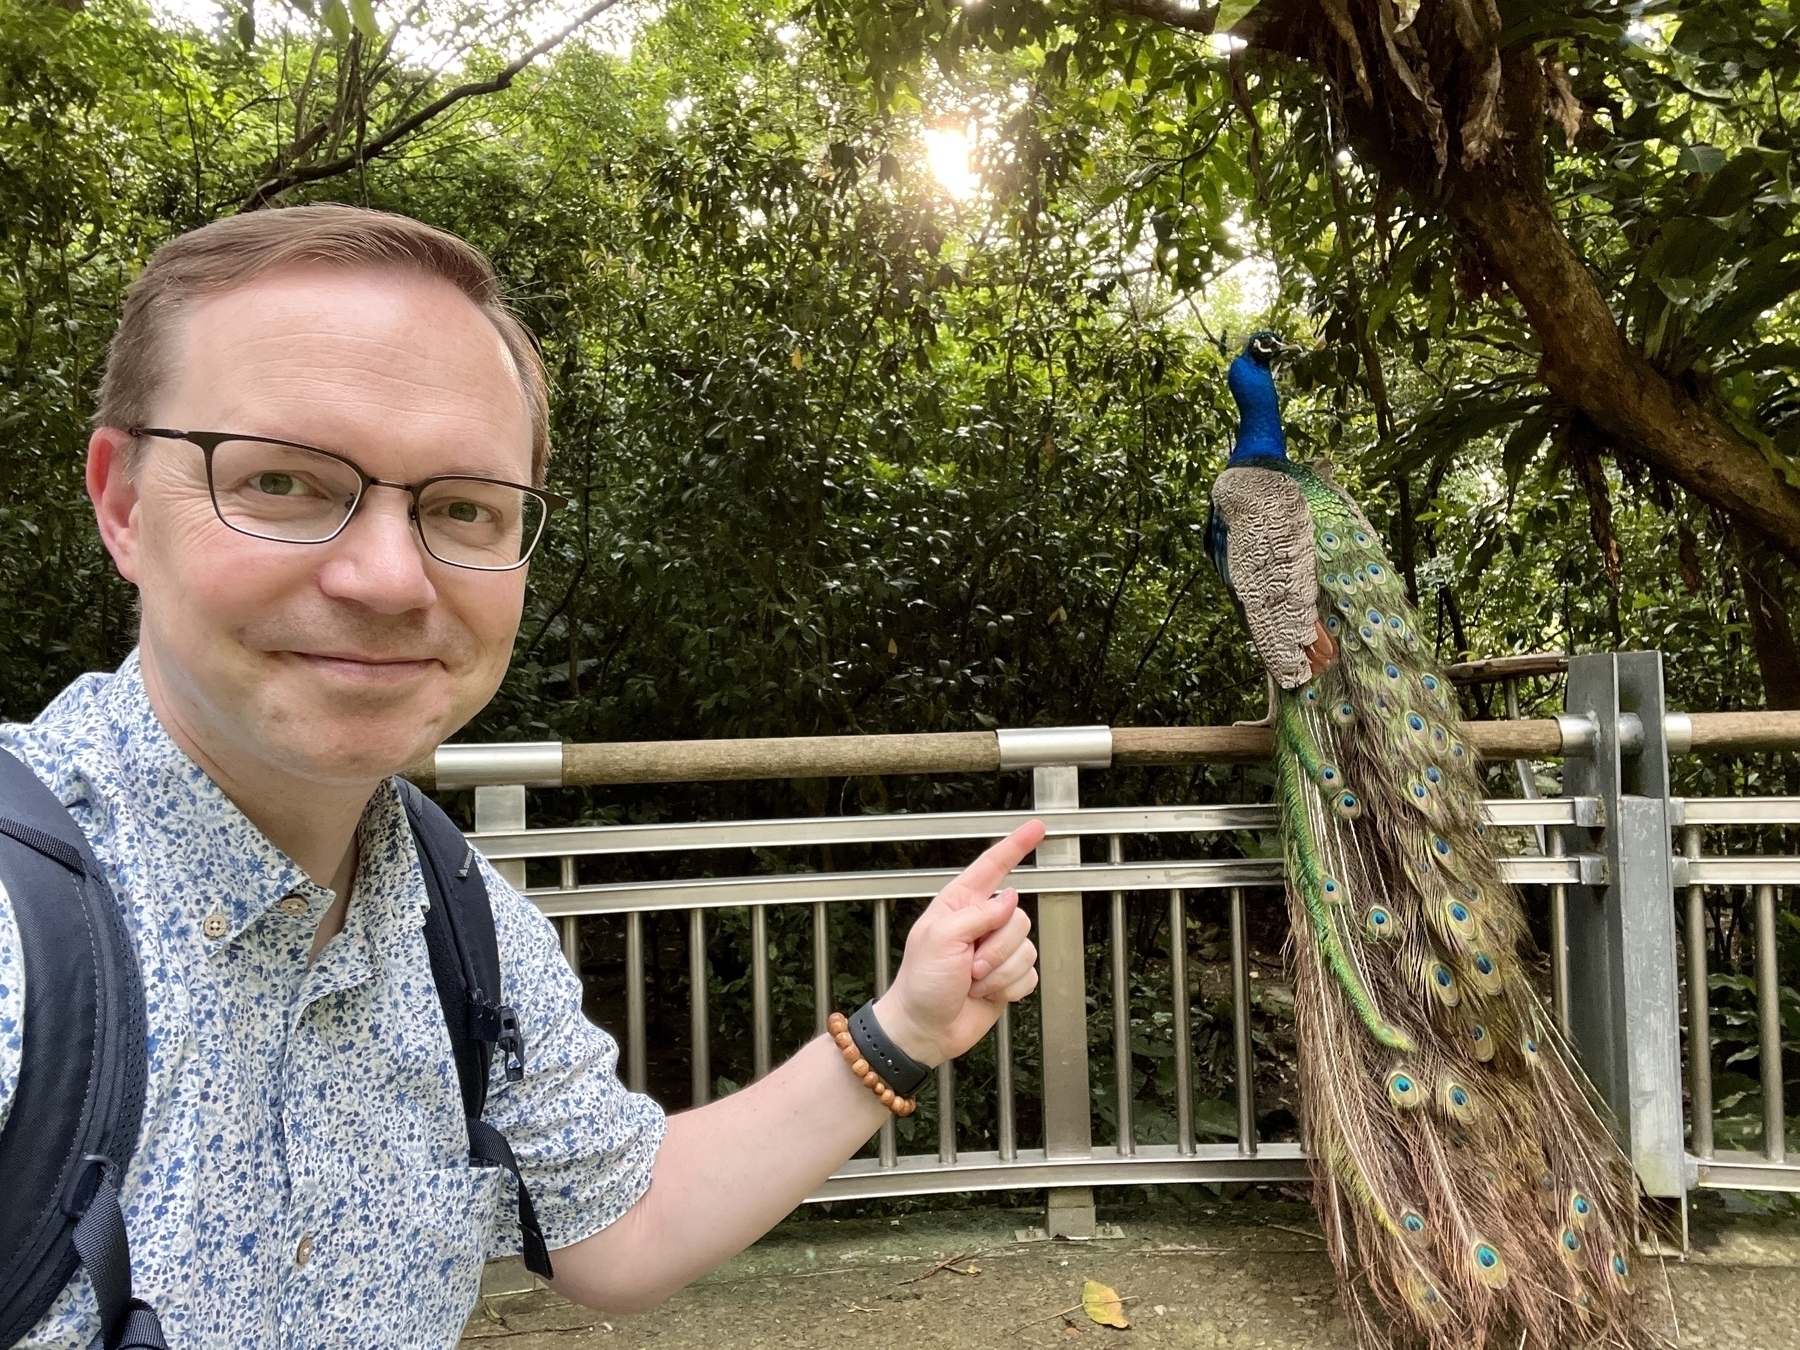 Chad selfie with a peacock on the handrail, its tail feathers sweeping down